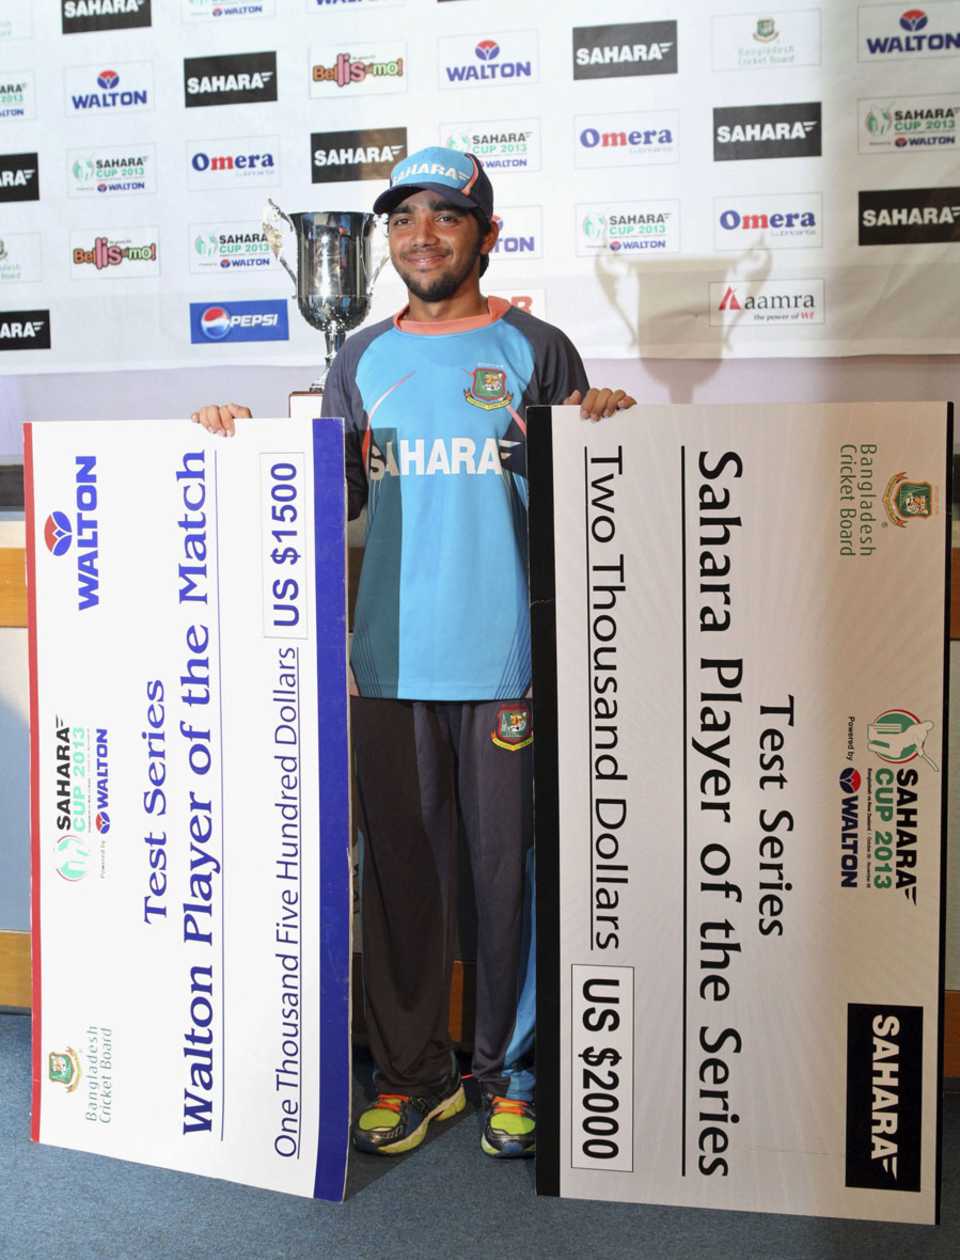 Mominul Haque was named Man of the Match, as well as Man of the Series